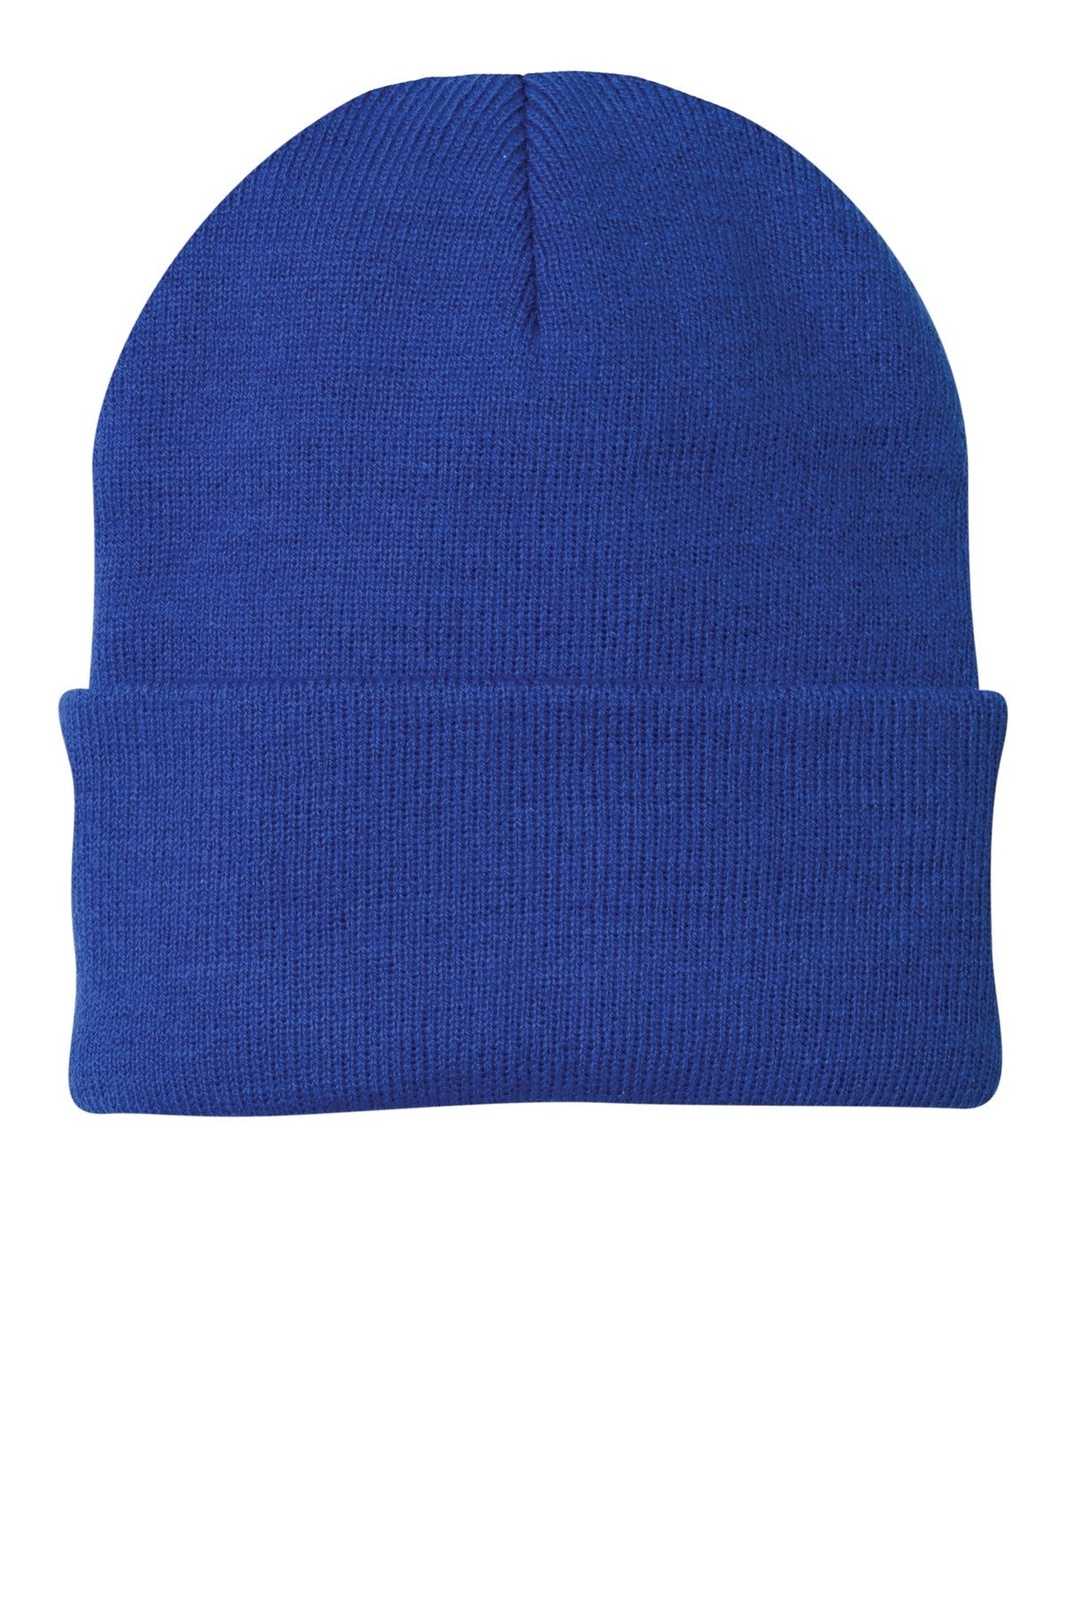 Port & Company CP90 Knit Cap with Cuff - Athletic Royal - HIT a Double - 1